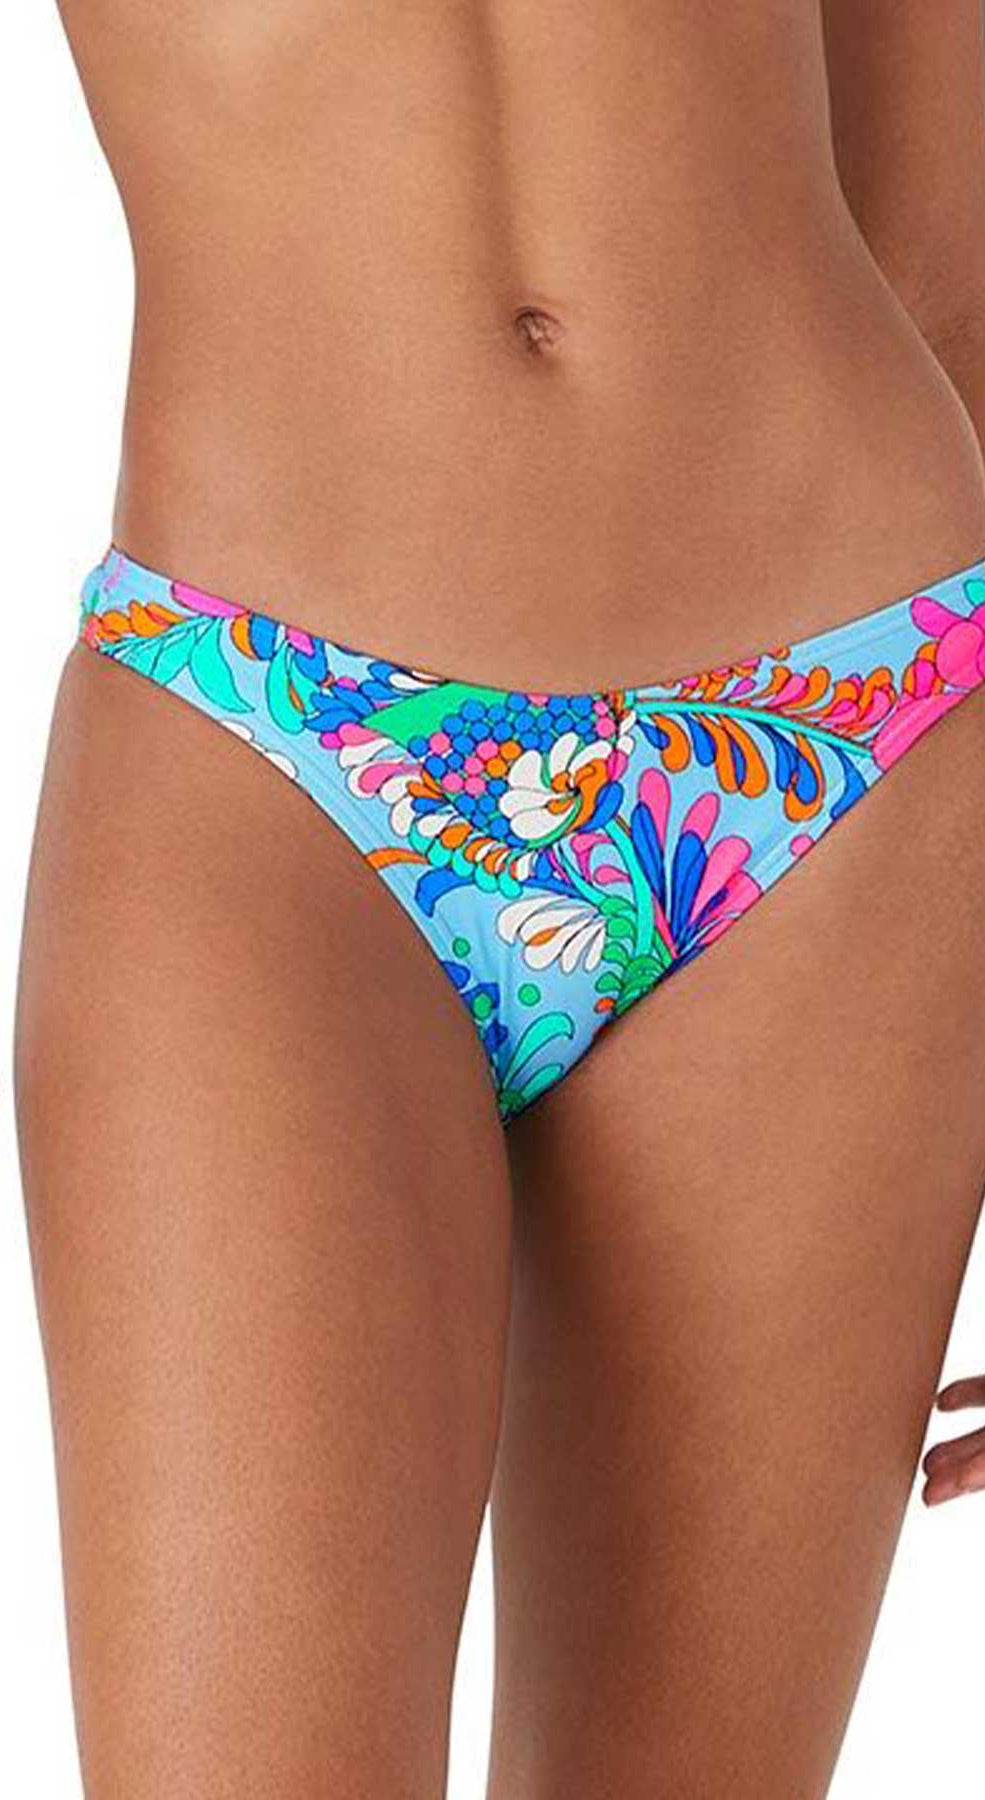 Usupdd Swimsuit Women, Mens Underwear Swim Trunks Low-rise Solid Smooth  Mens Brief Swimming Briefs Red White And Blue Bikini Shapermint Swimwear